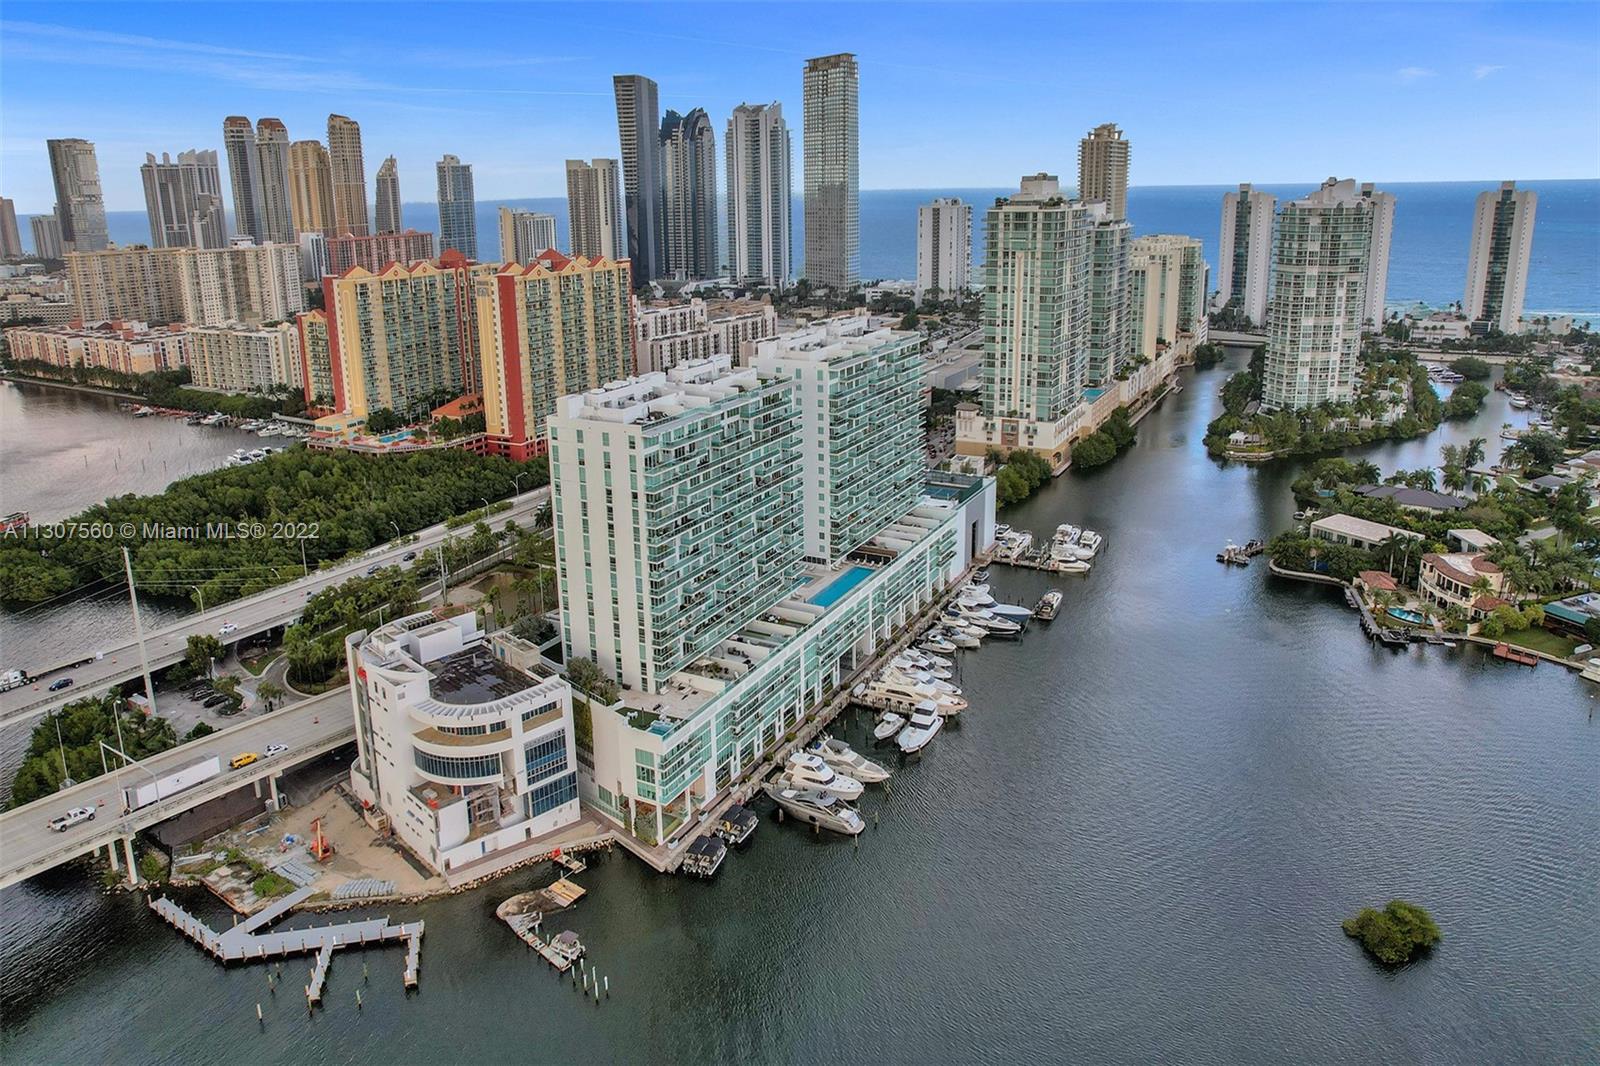 Breathtaking Million Dollar views from all rooms over Intracoastal, Oleta River Park, and Ocean. 1690 SqFt Luxury 2-story condo w/ UNIQUE Master bedroom on 2nd floor.  Features 2 bedrooms + 1 Den, 3 bathrooms, modern kitchen, and large open ceiling balcony with non-obstructed panoramic view. Resort Style Amenities such as Infinity Lap pool, Giant Jacuzzi, Spa, Fitness Center, Pool Bar, Steam Room, Meditation Garden, Mediterranean Restaurant, and Tennis Court. Amenities on the 6th floor with a view over the Bay and out to Ocean. Val.Park/24 hr security. Boater’s paradise with an independent wet Marina with Dry Dock Storage. Close to Bal Harbor and world renowned Aventura Mall shopping and walking distance to amazing restaurants, shops and nature Life at Oleta River Park.